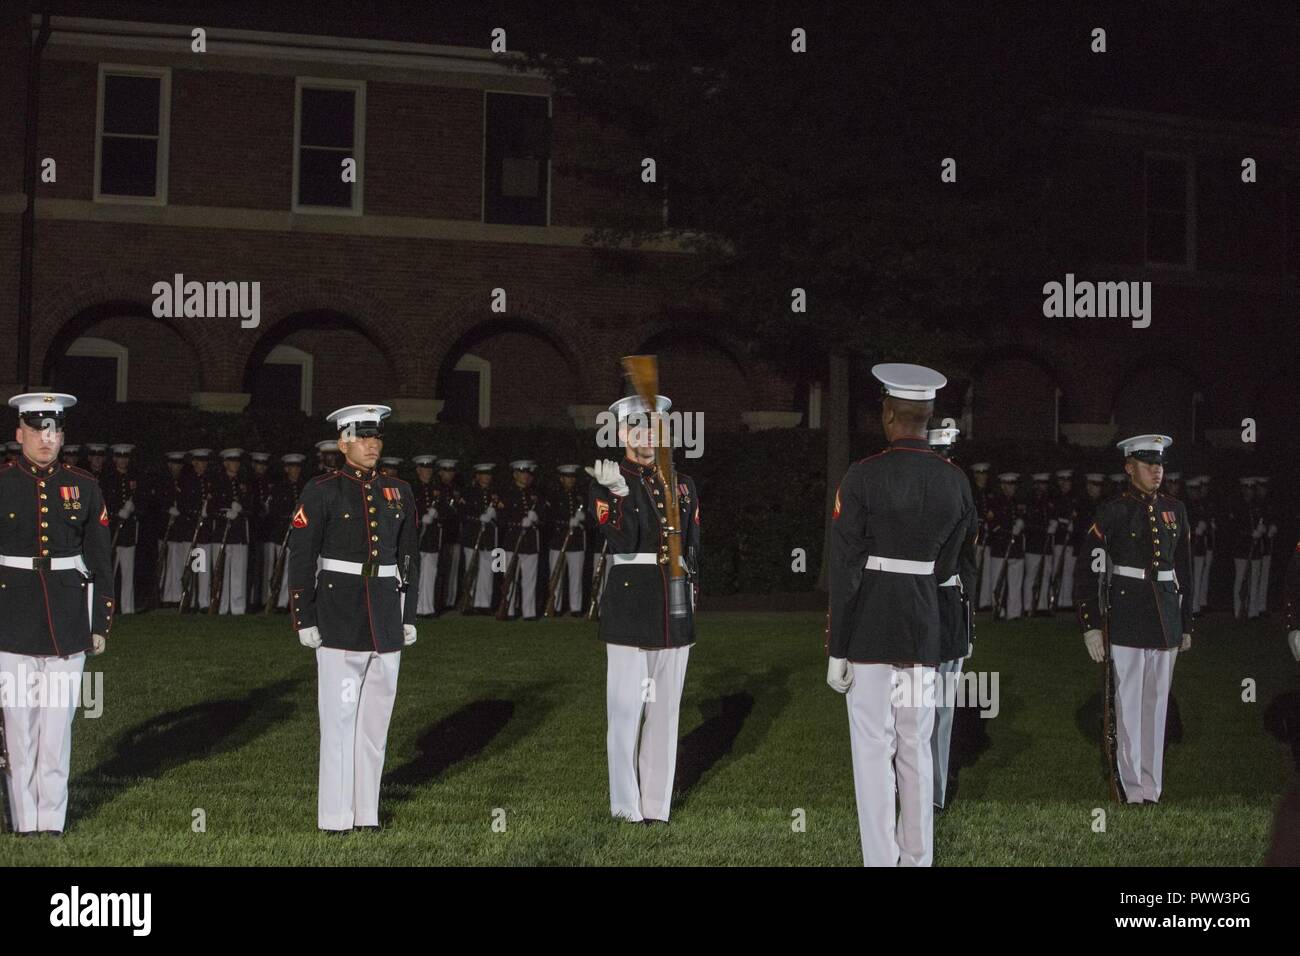 The Marine Corps Silent Drill Platoon performs during an evening parade at Marine Barracks Washington, Washington, D.C., June 23, 2017. Evening parades are held as a means of honoring senior officials, distinguished citizens and supporters of the Marine Corps. Stock Photo